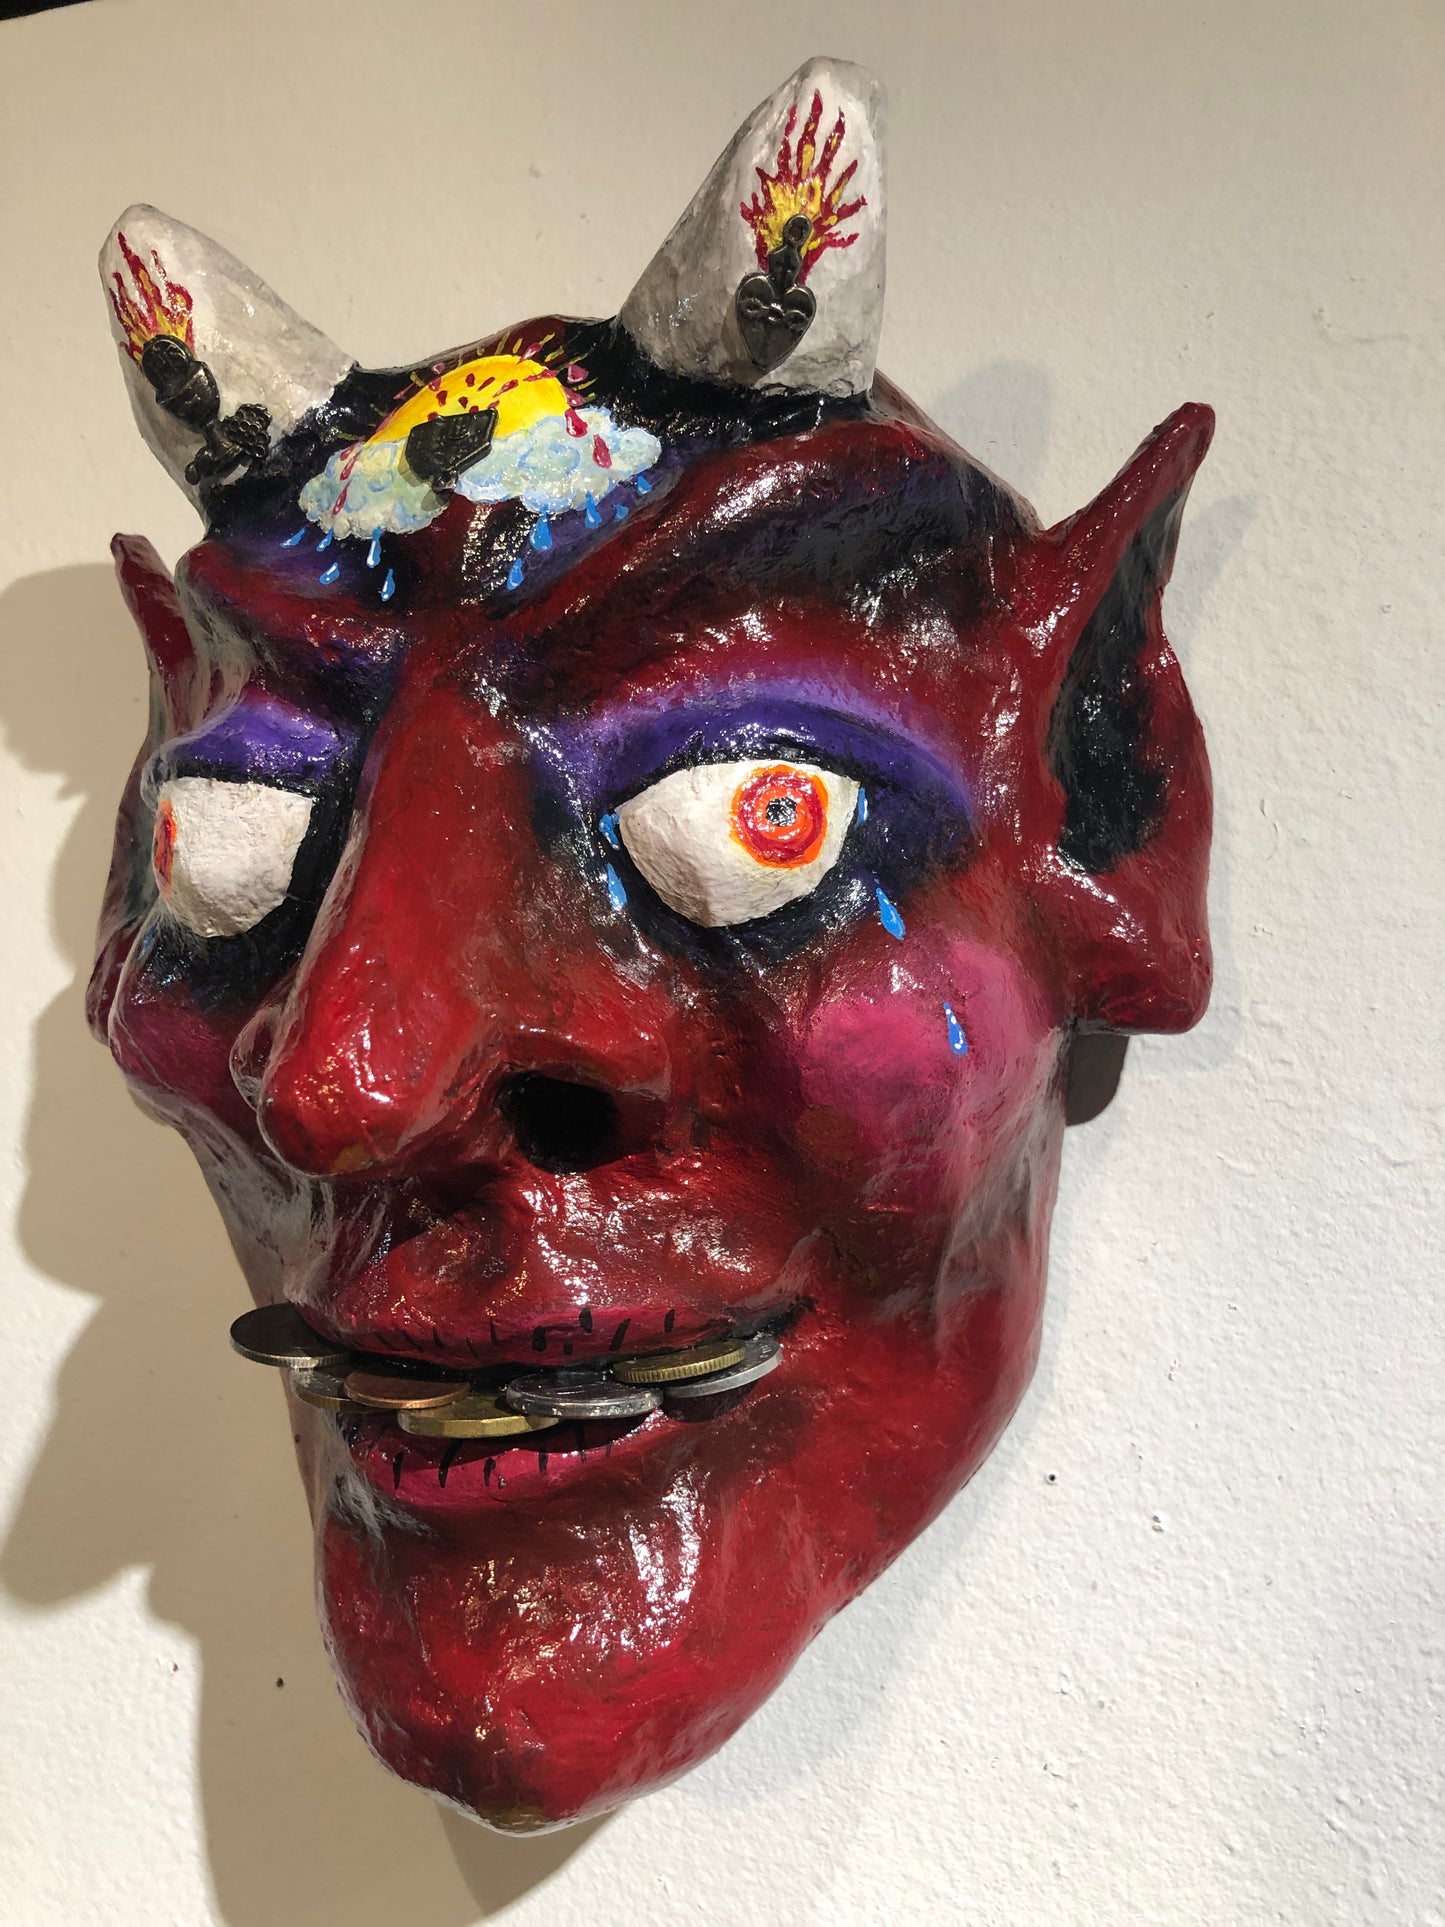 Oscar Rodriguez "I Have Four Words for You... Suck It" Mask Sculpture